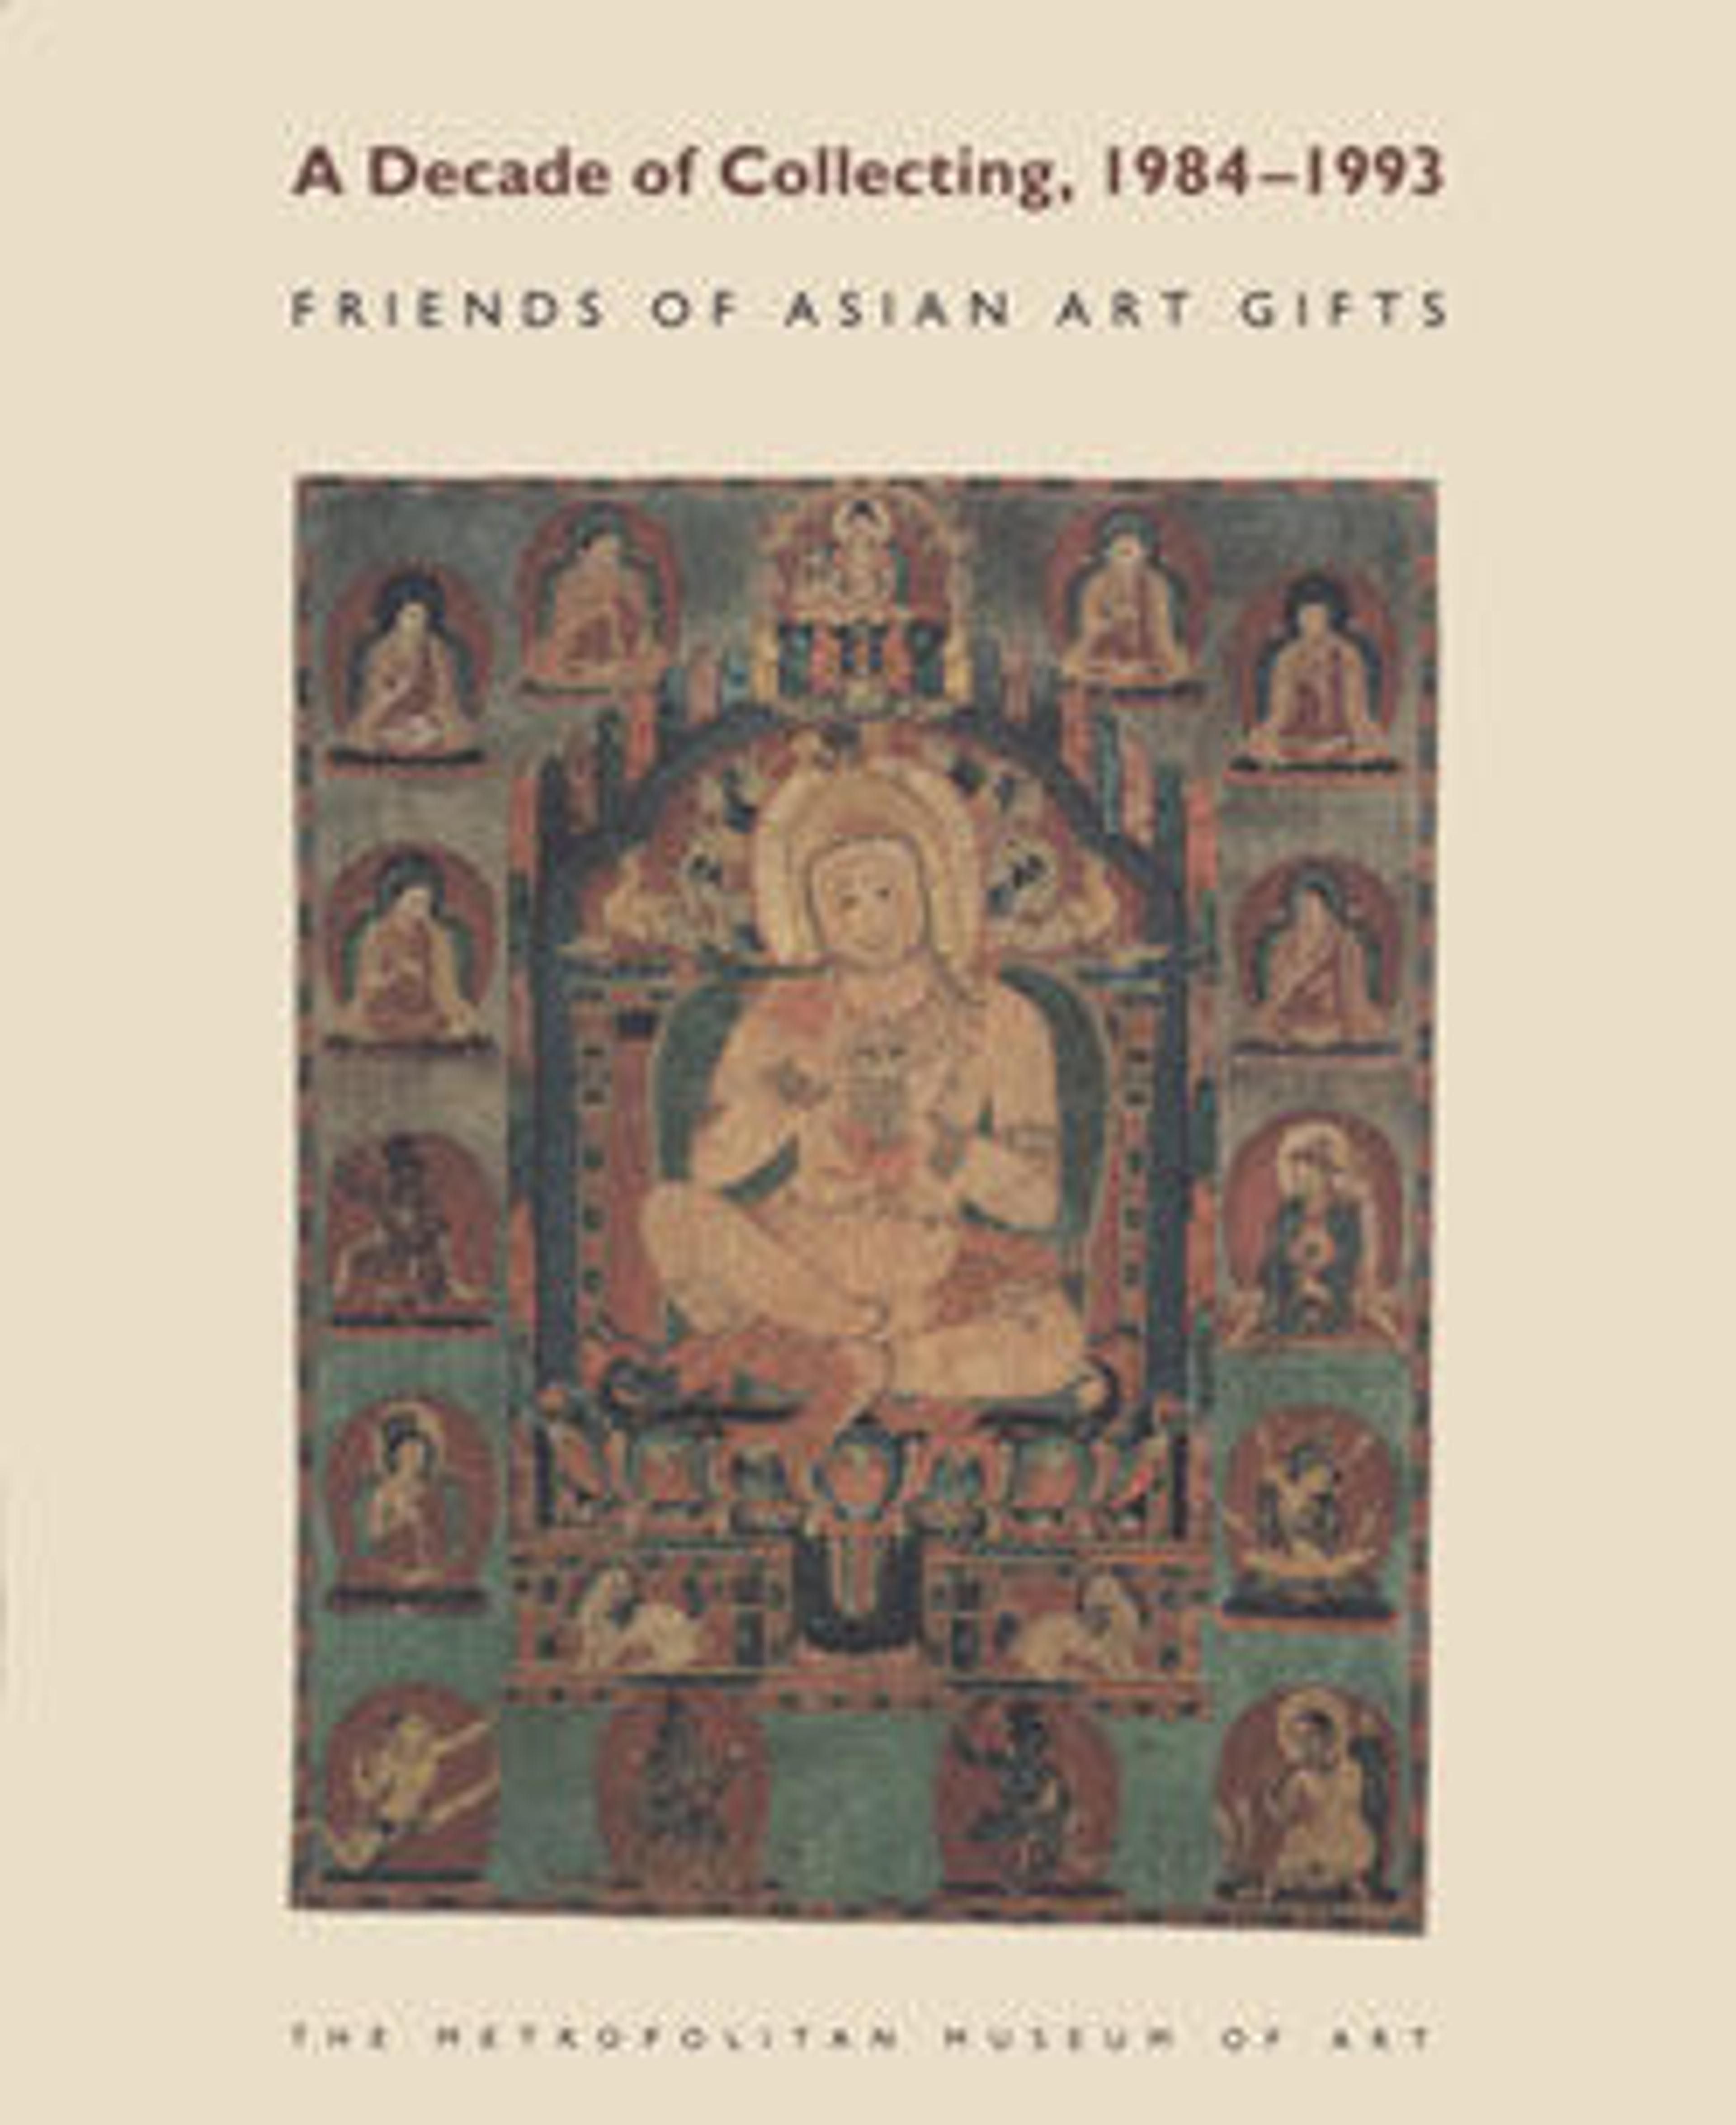 A Decade of Collecting, 1984-1993: Friends of Asian Art Gifts